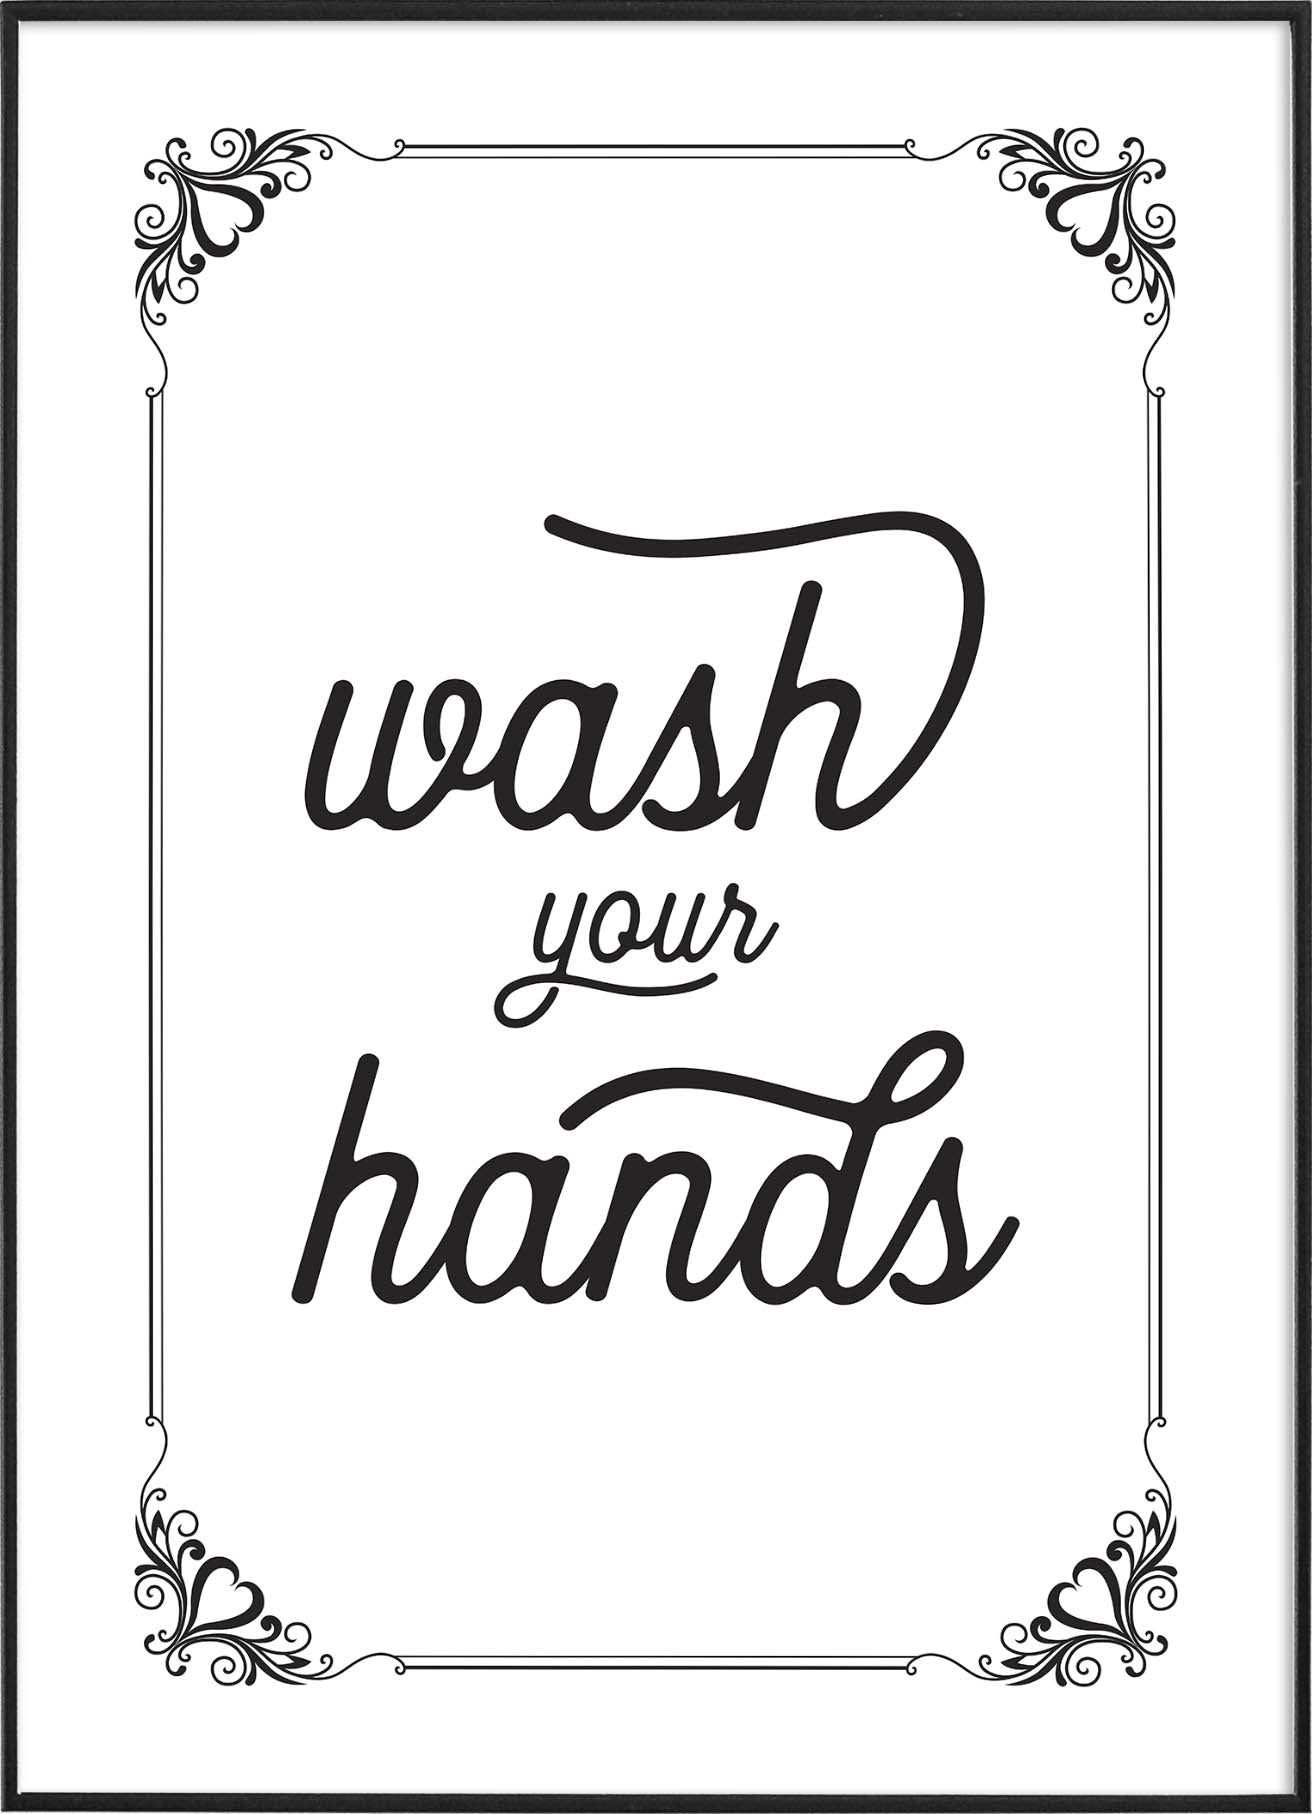 Black and white typography poster with the phrase ‘wash your hands’ in cursive lettering, surrounded by a decorative border.